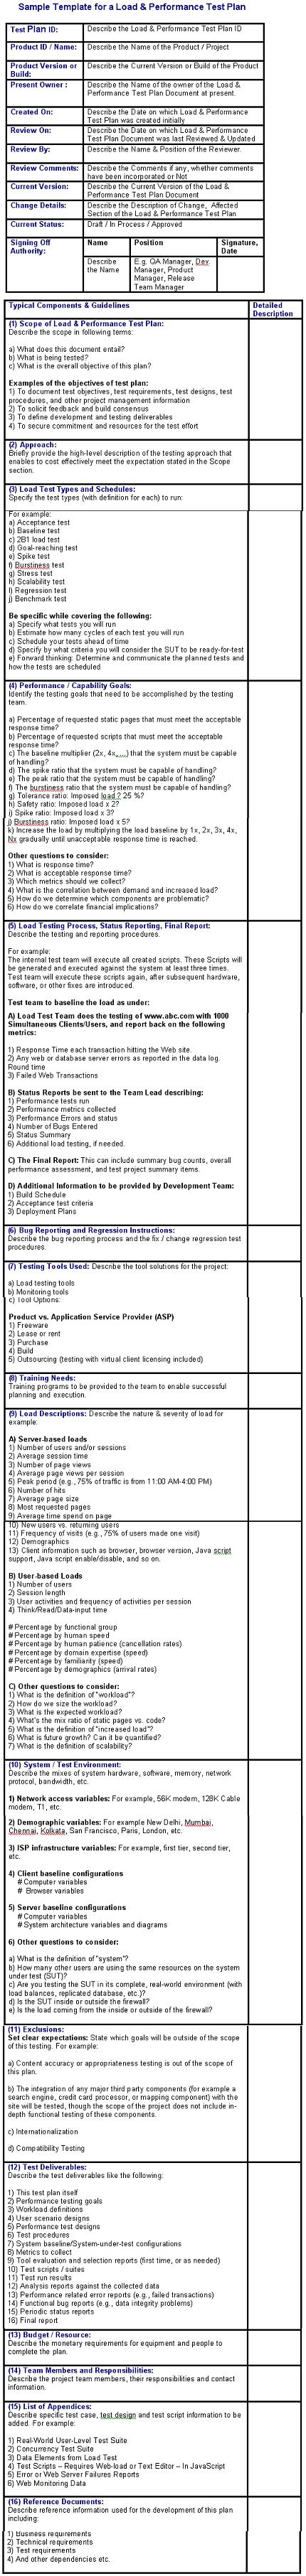 Load & Performance Test Plan Template